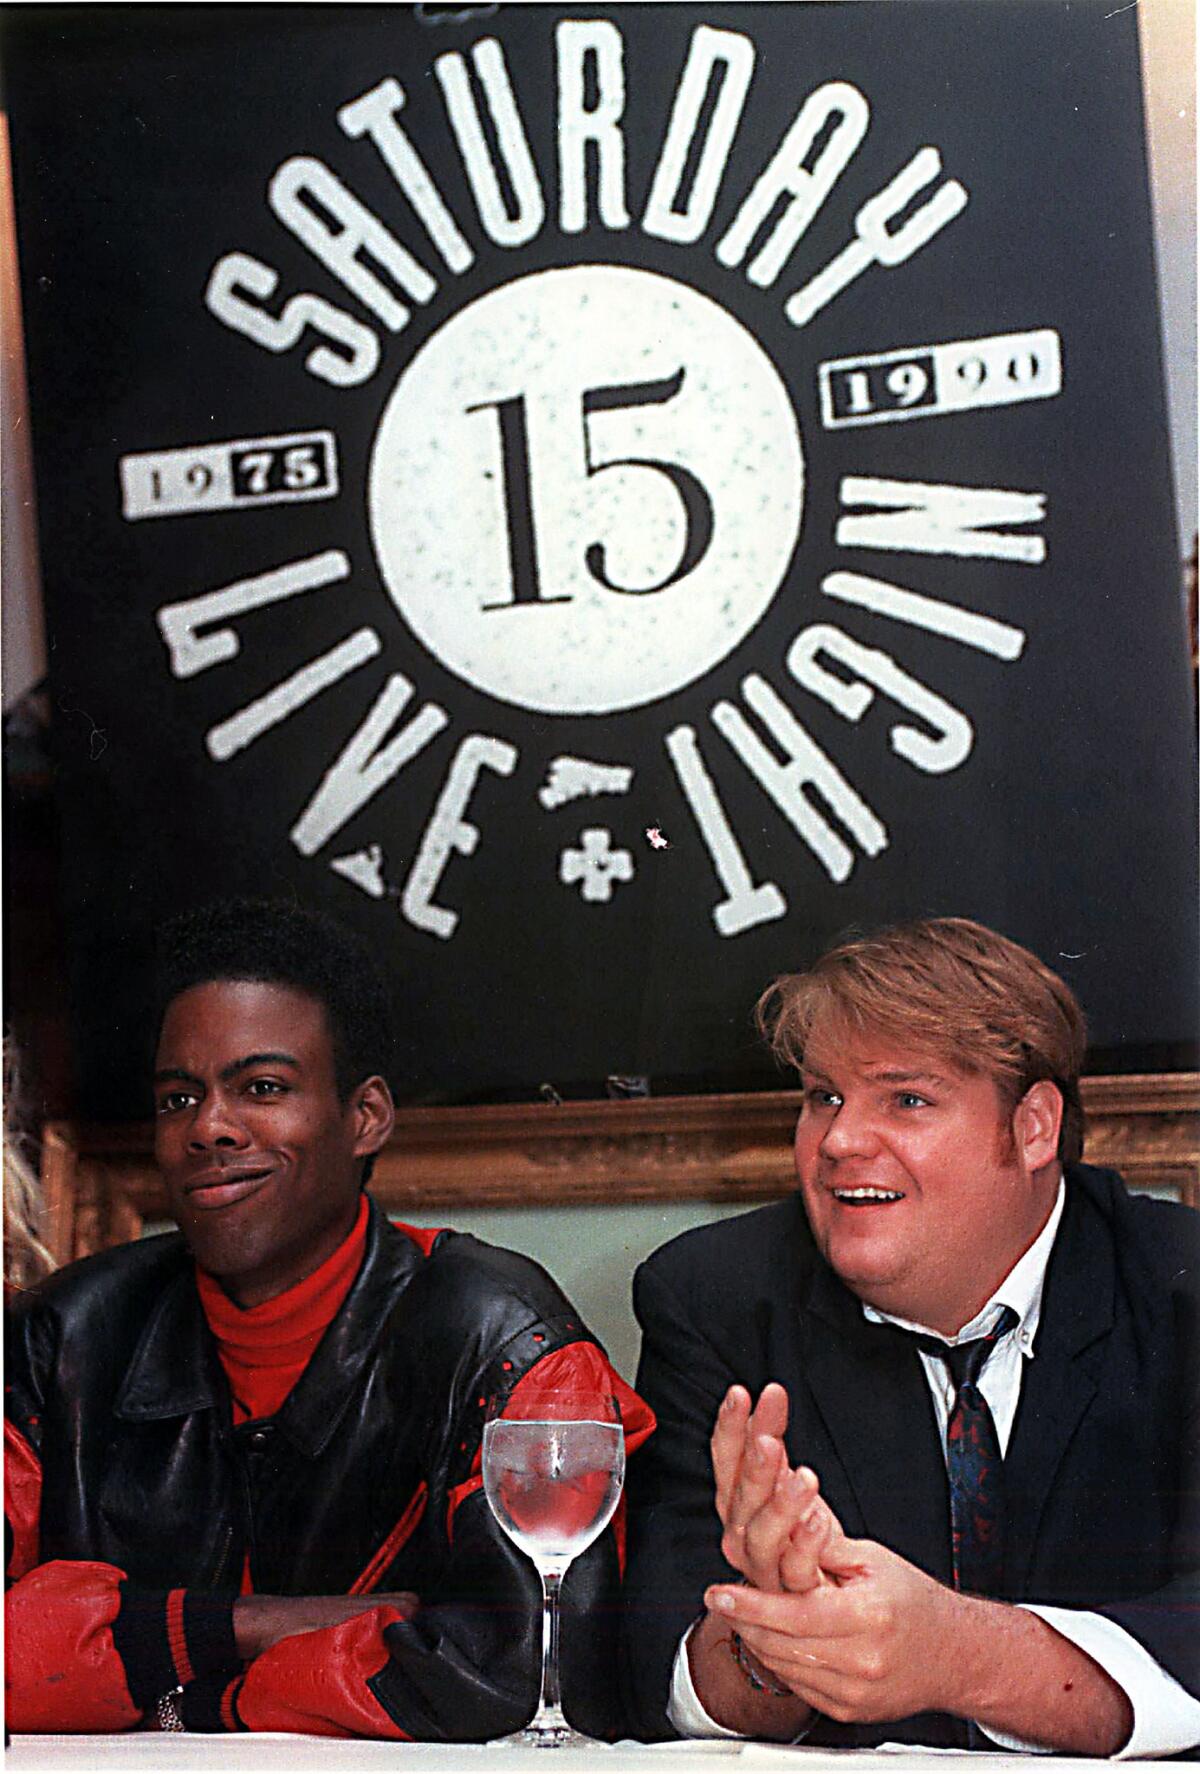 Actors Chris Rock, left, and Chris Farley speak at a news conference in New York during an announcement that they will be joining the cast of "Saturday Night Live," Sept. 18, 1990.